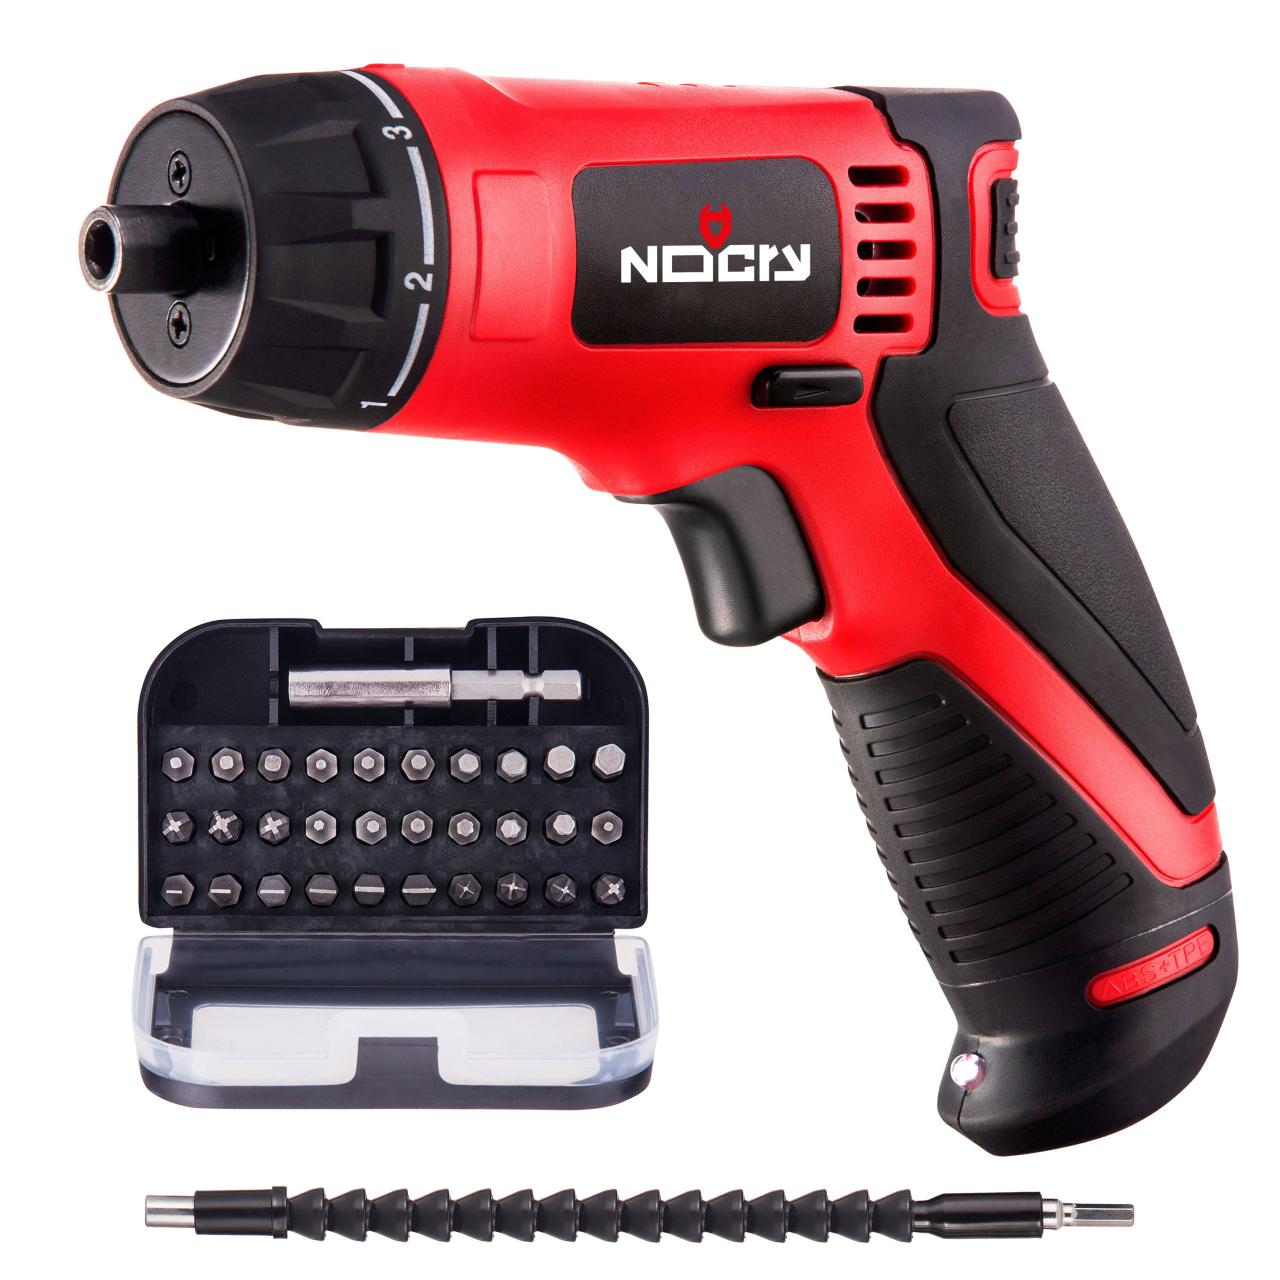 NoCry 10/125 Professional Rotary Tool Kit with Heavy Duty 170W Electric  Motor, Universal 3-Jaw Chuck, 8,000-35,000 RPM, 10 Attachments & 125  Accessories Included : Amazon.co.uk: DIY & Tools